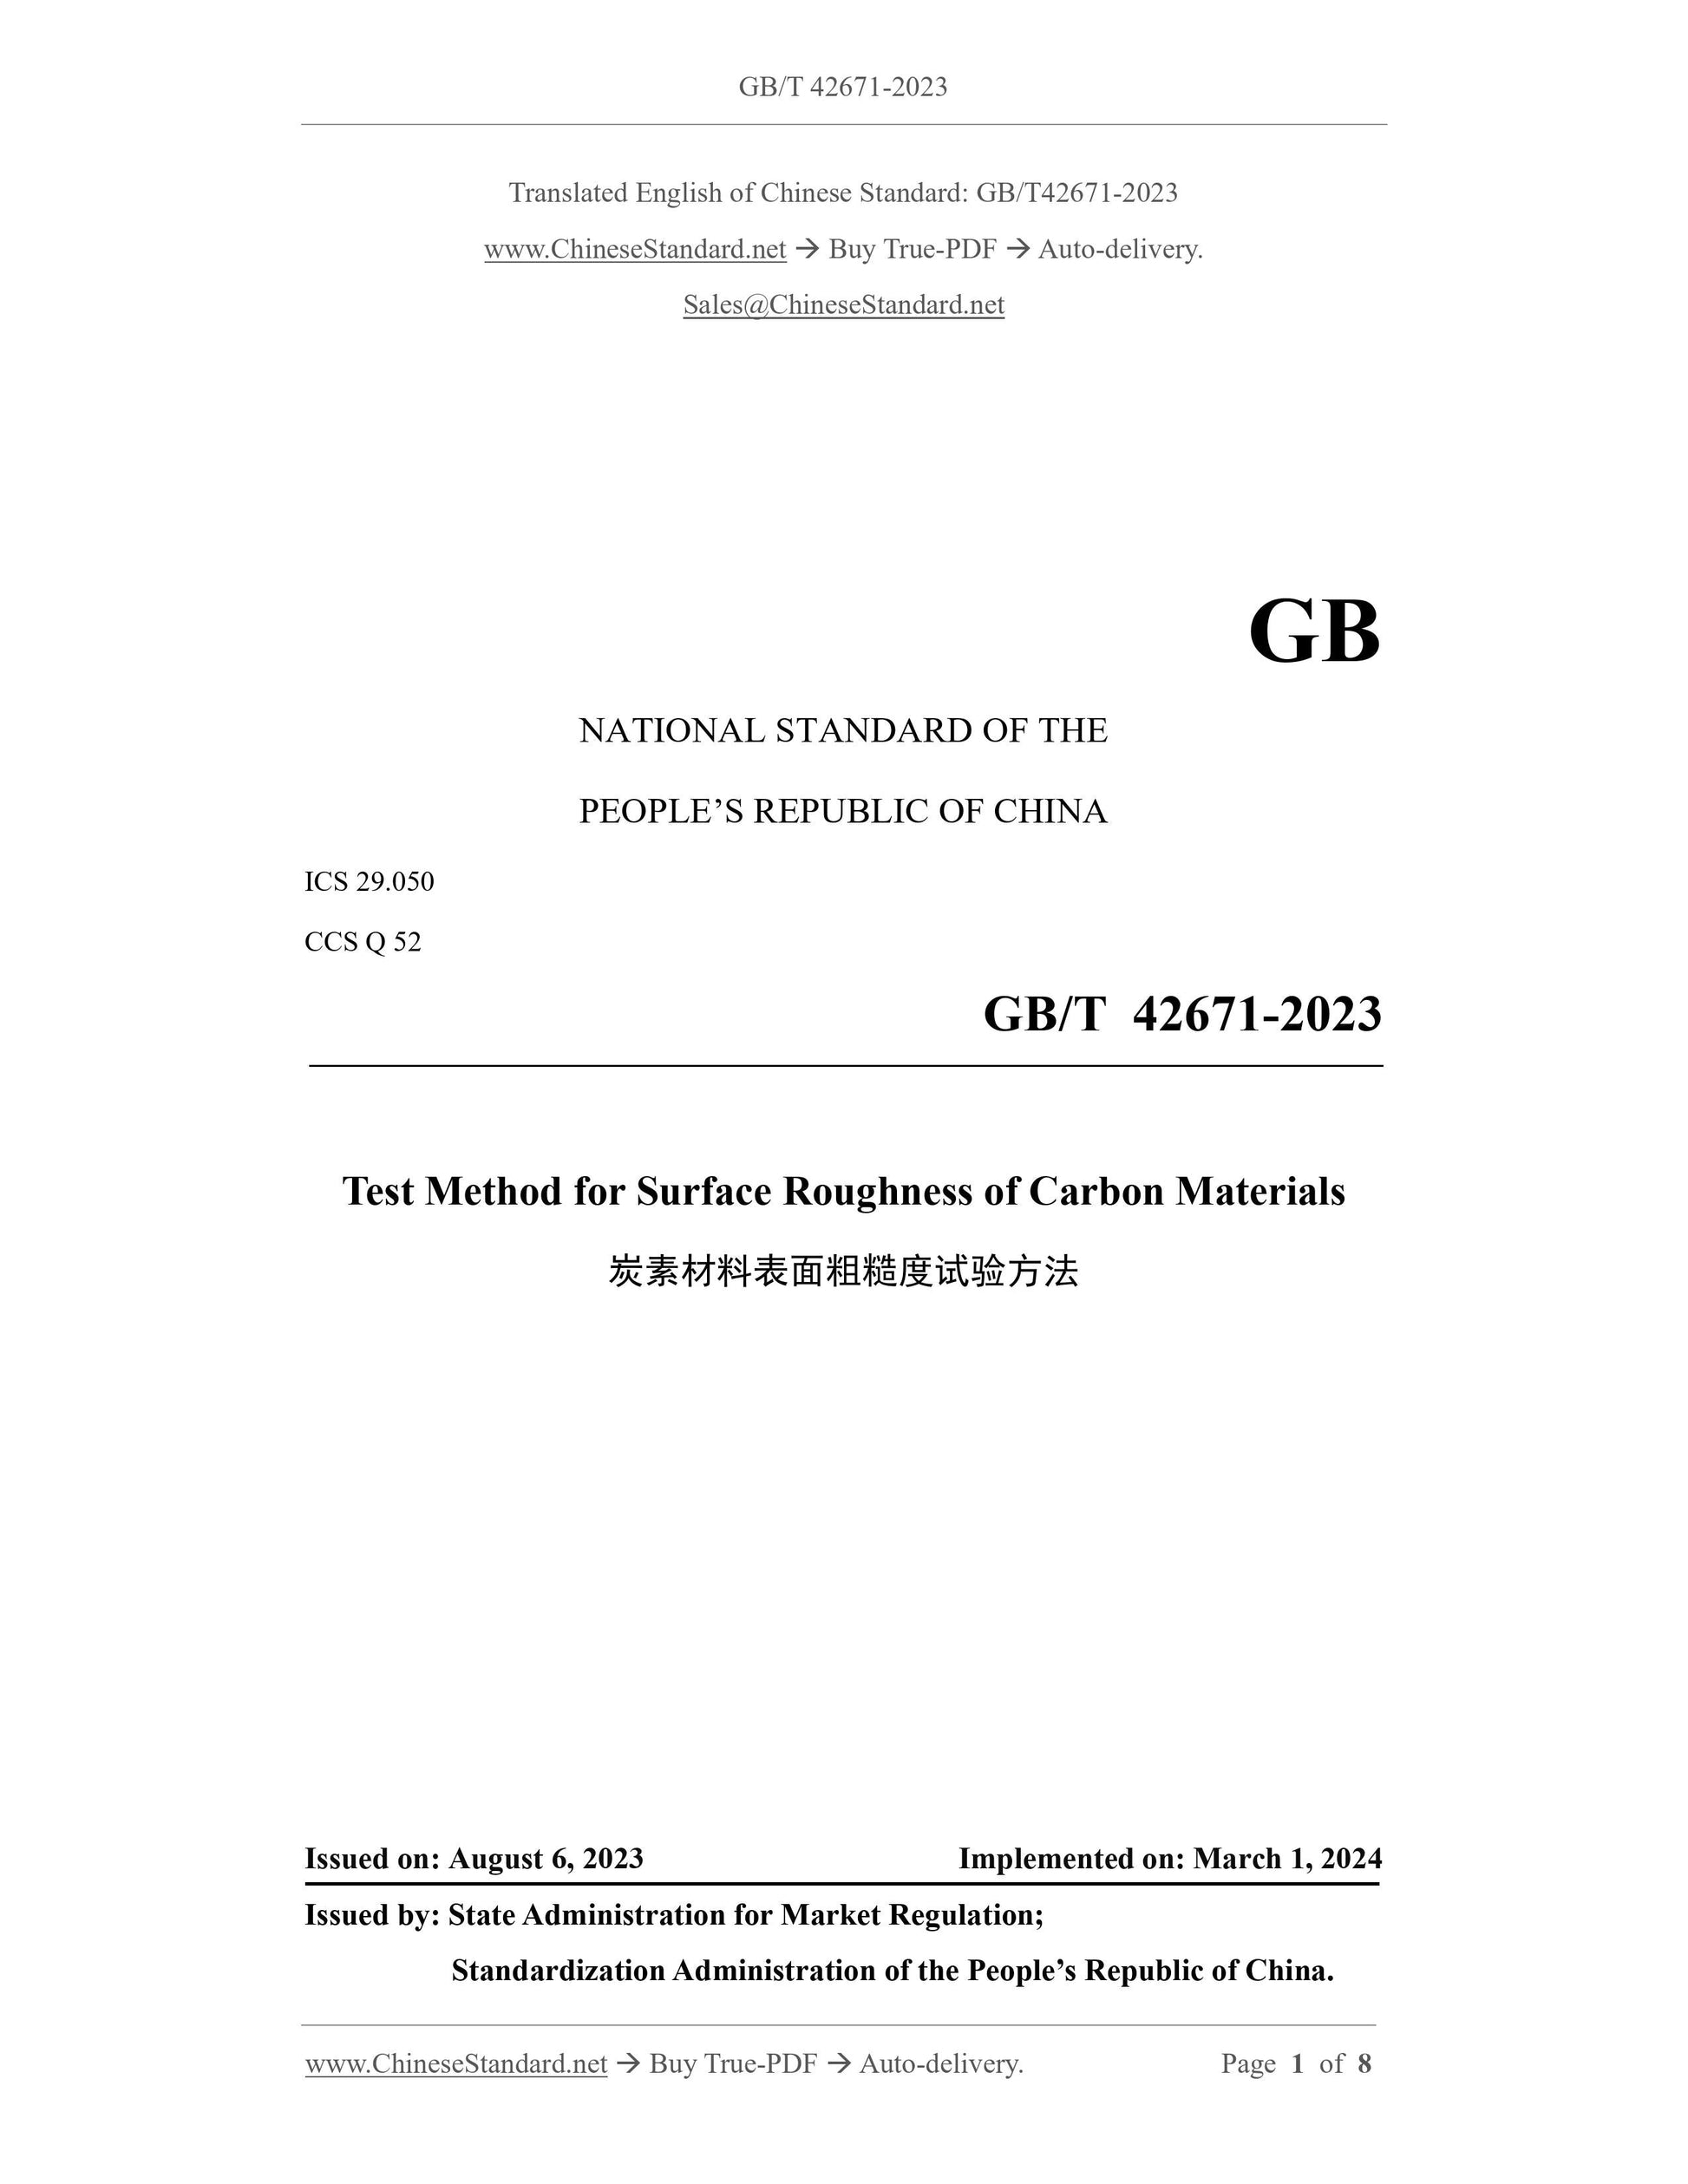 GB/T 42671-2023 Page 1